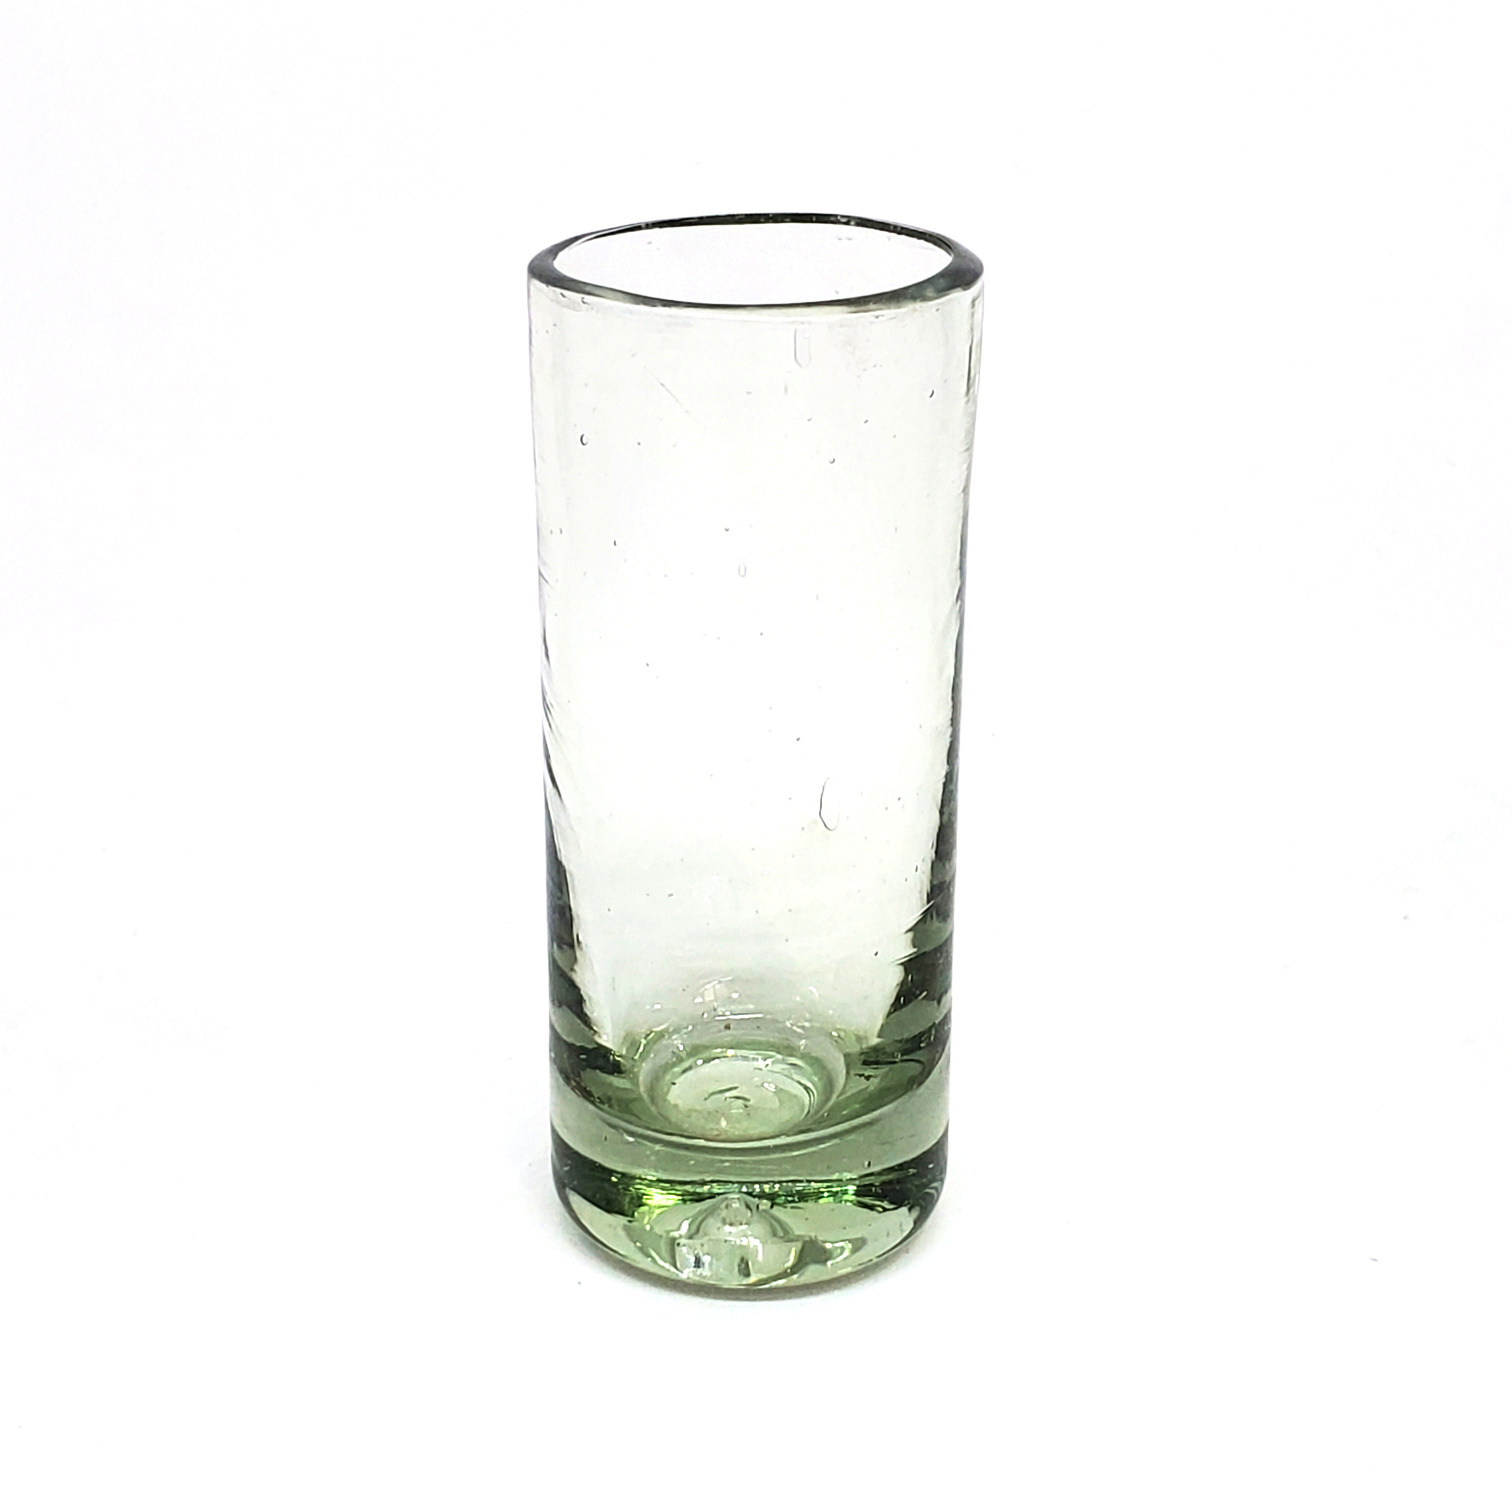 Wholesale Tequila Shot Glasses / Clear 2 oz Tequila Shot Glasses  / Sip your favourite tequila or mezcal with these iconic clear handcrafted shot glasses.